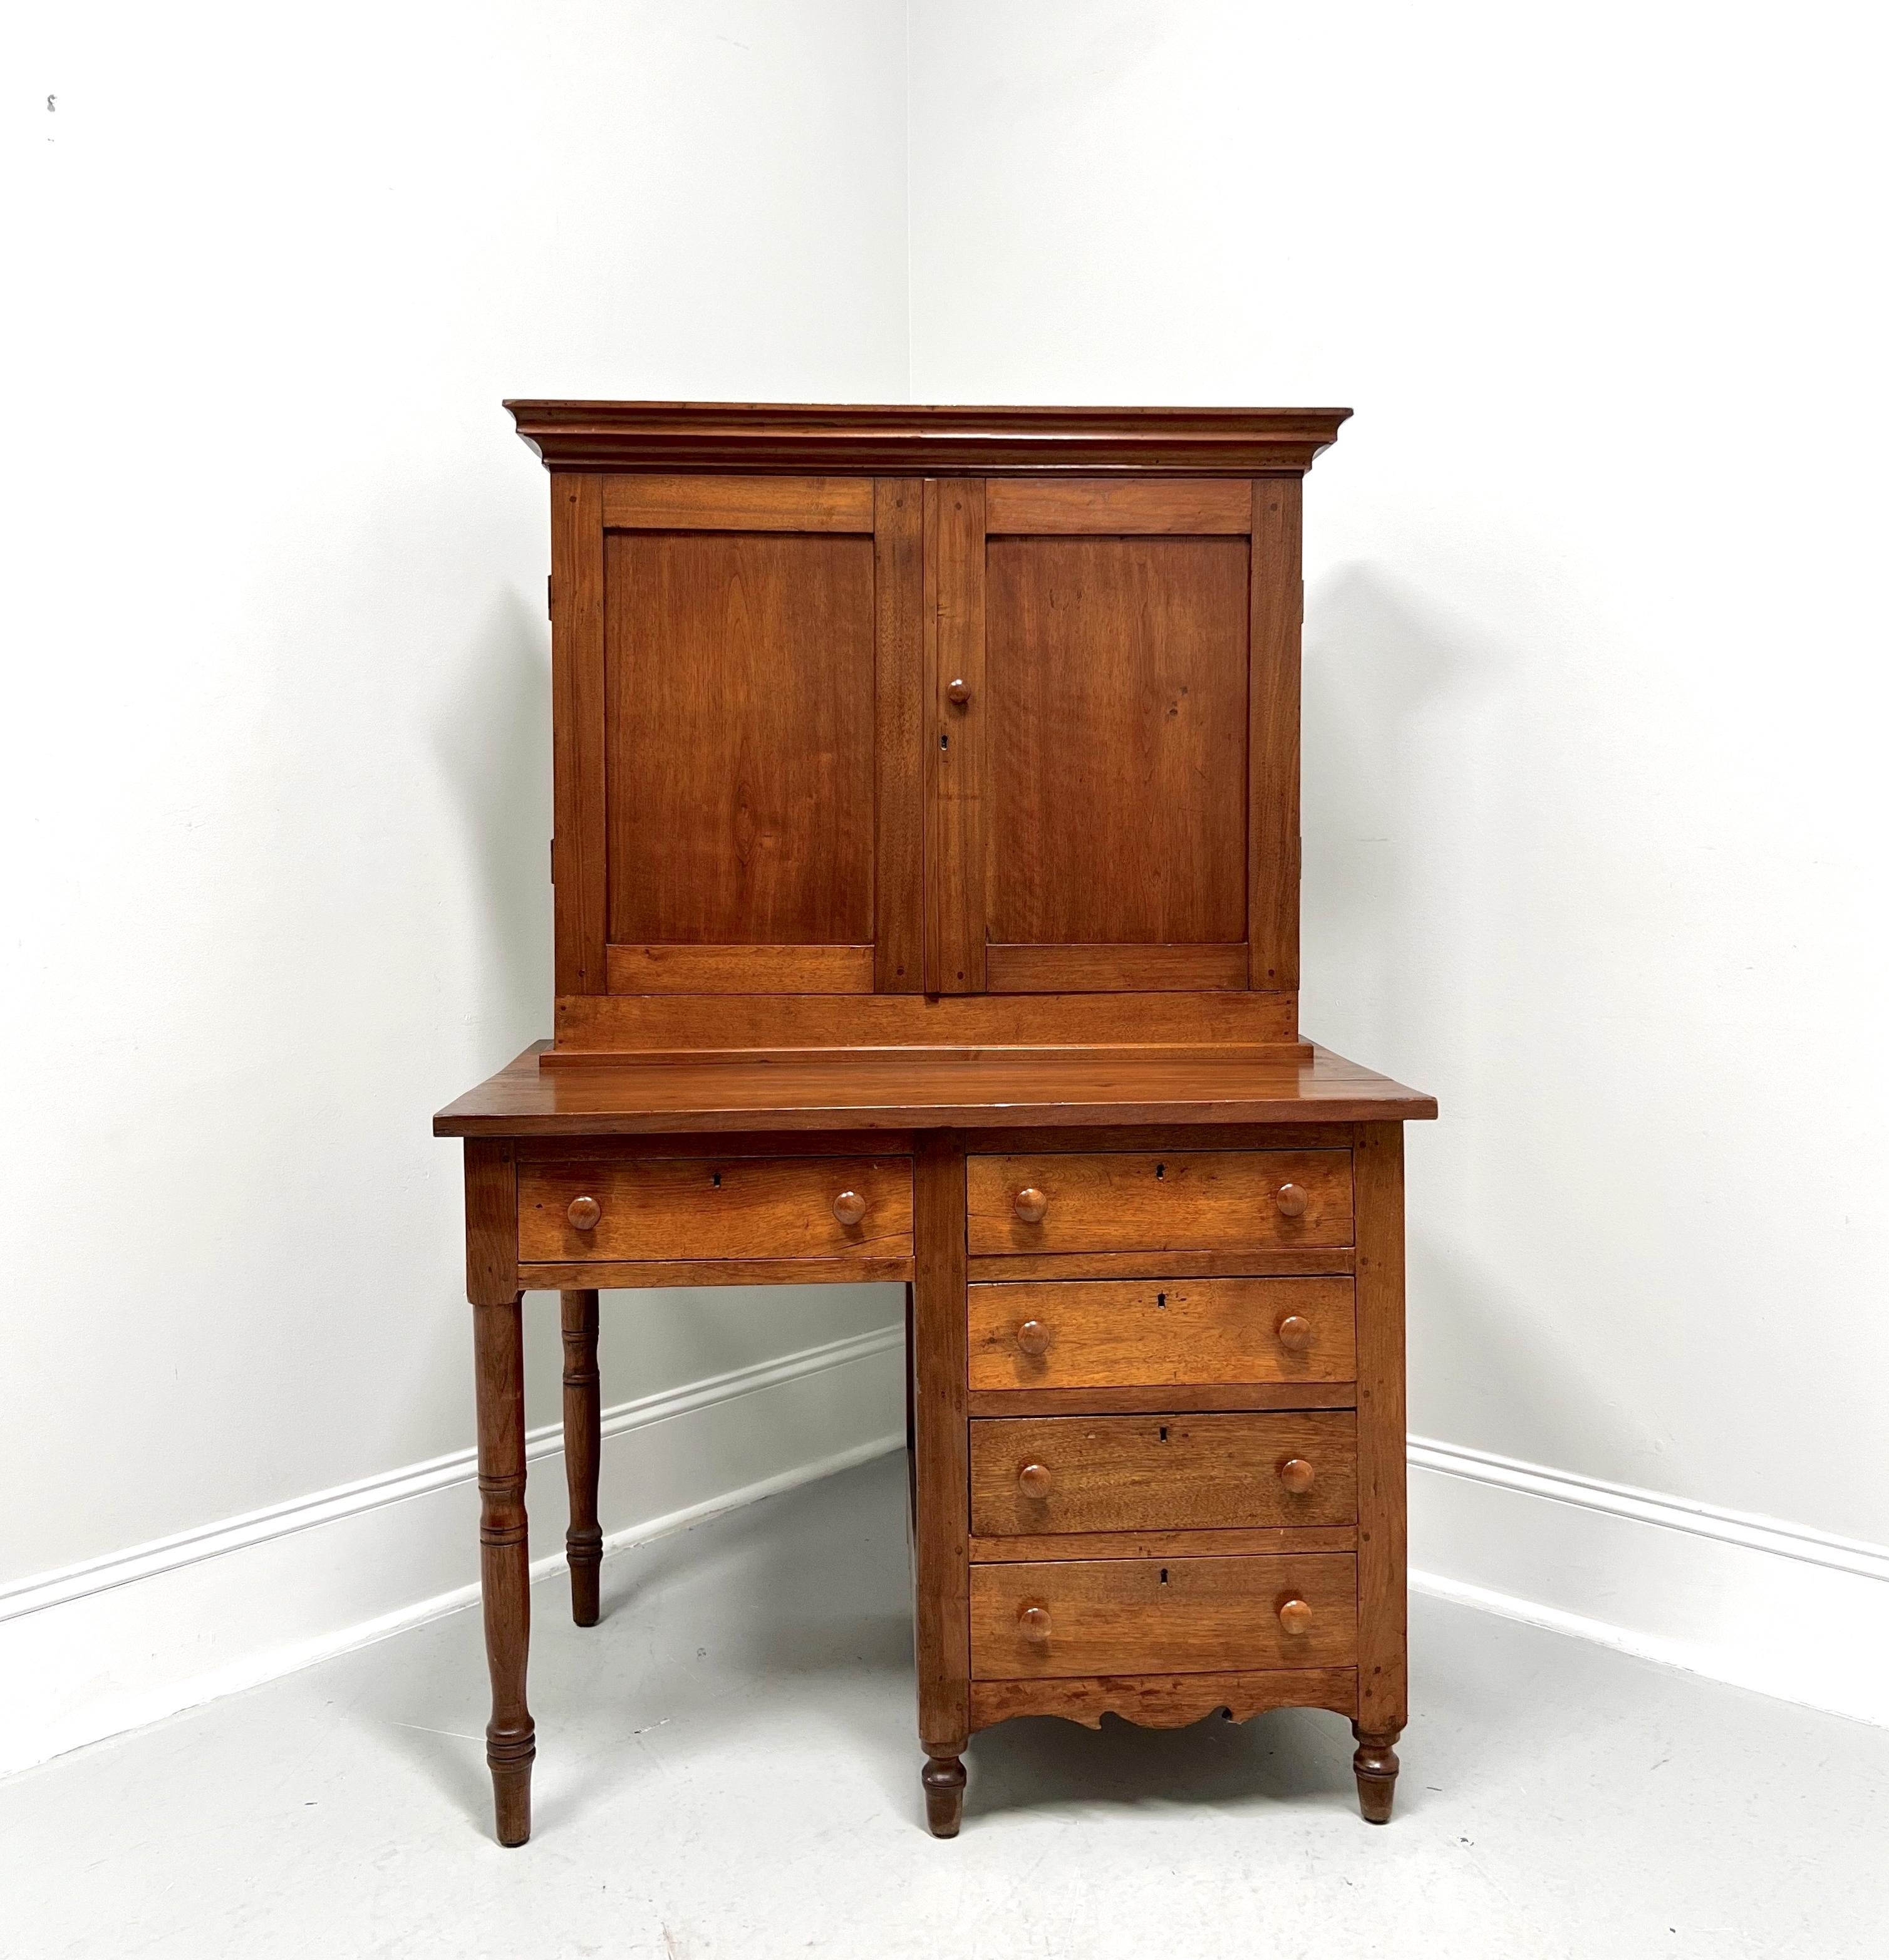 An antique 19th Century American plantation / postal desk, handcrafted by Moravian craftsmen in the Shenandoah Valley of Virginia, USA. Solid walnut, crown moulding to upper cabinet, framed holder for upper cabinet on desk surface, square edge to